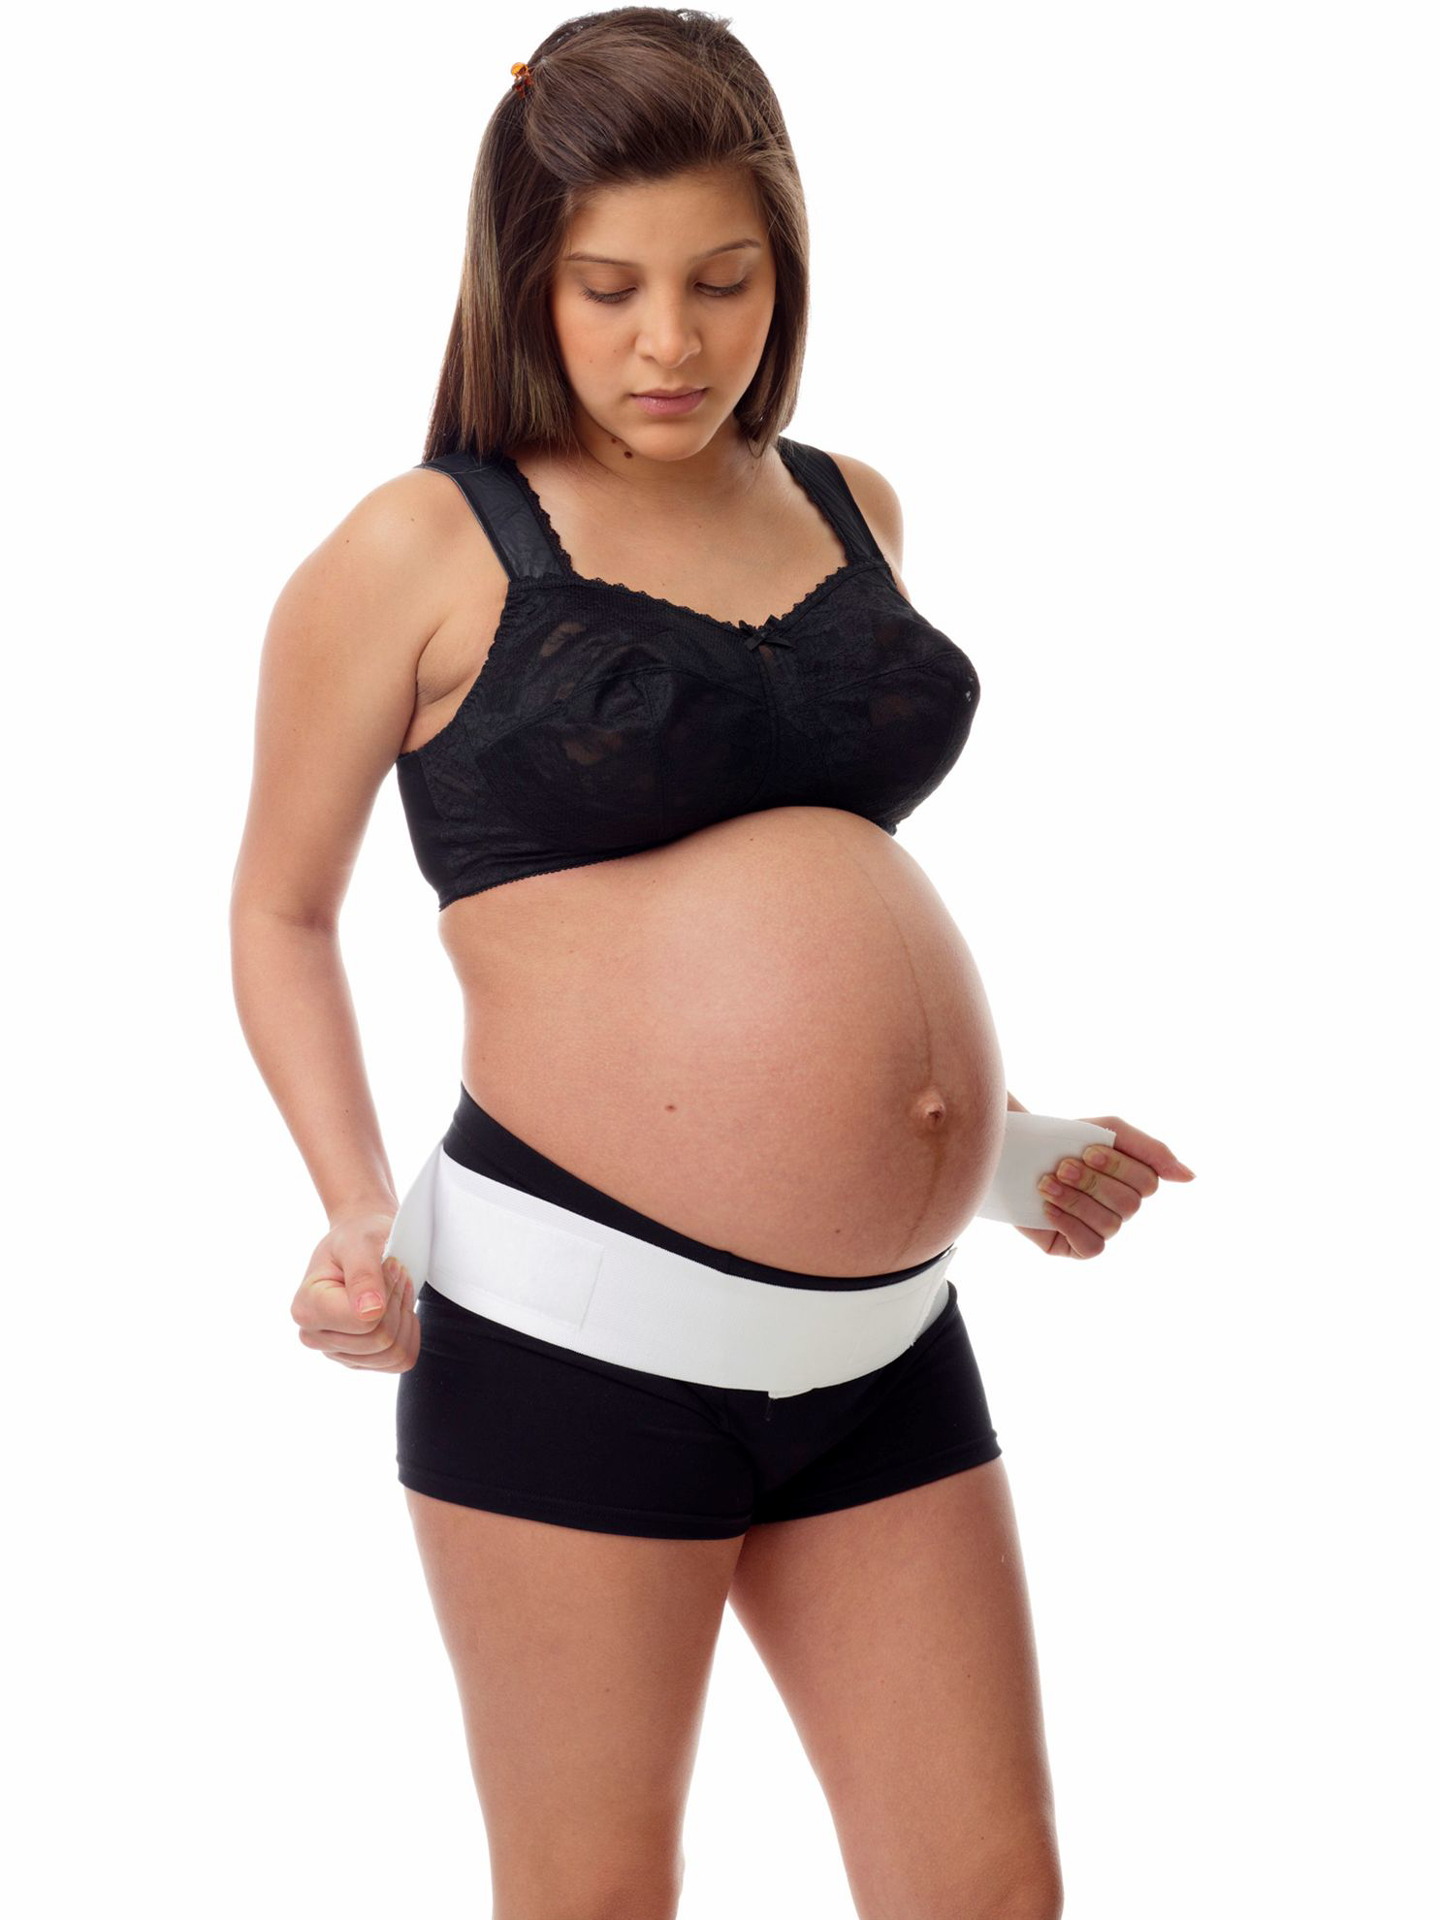 hernia support maternity pants Compression Underwear maternity belt 